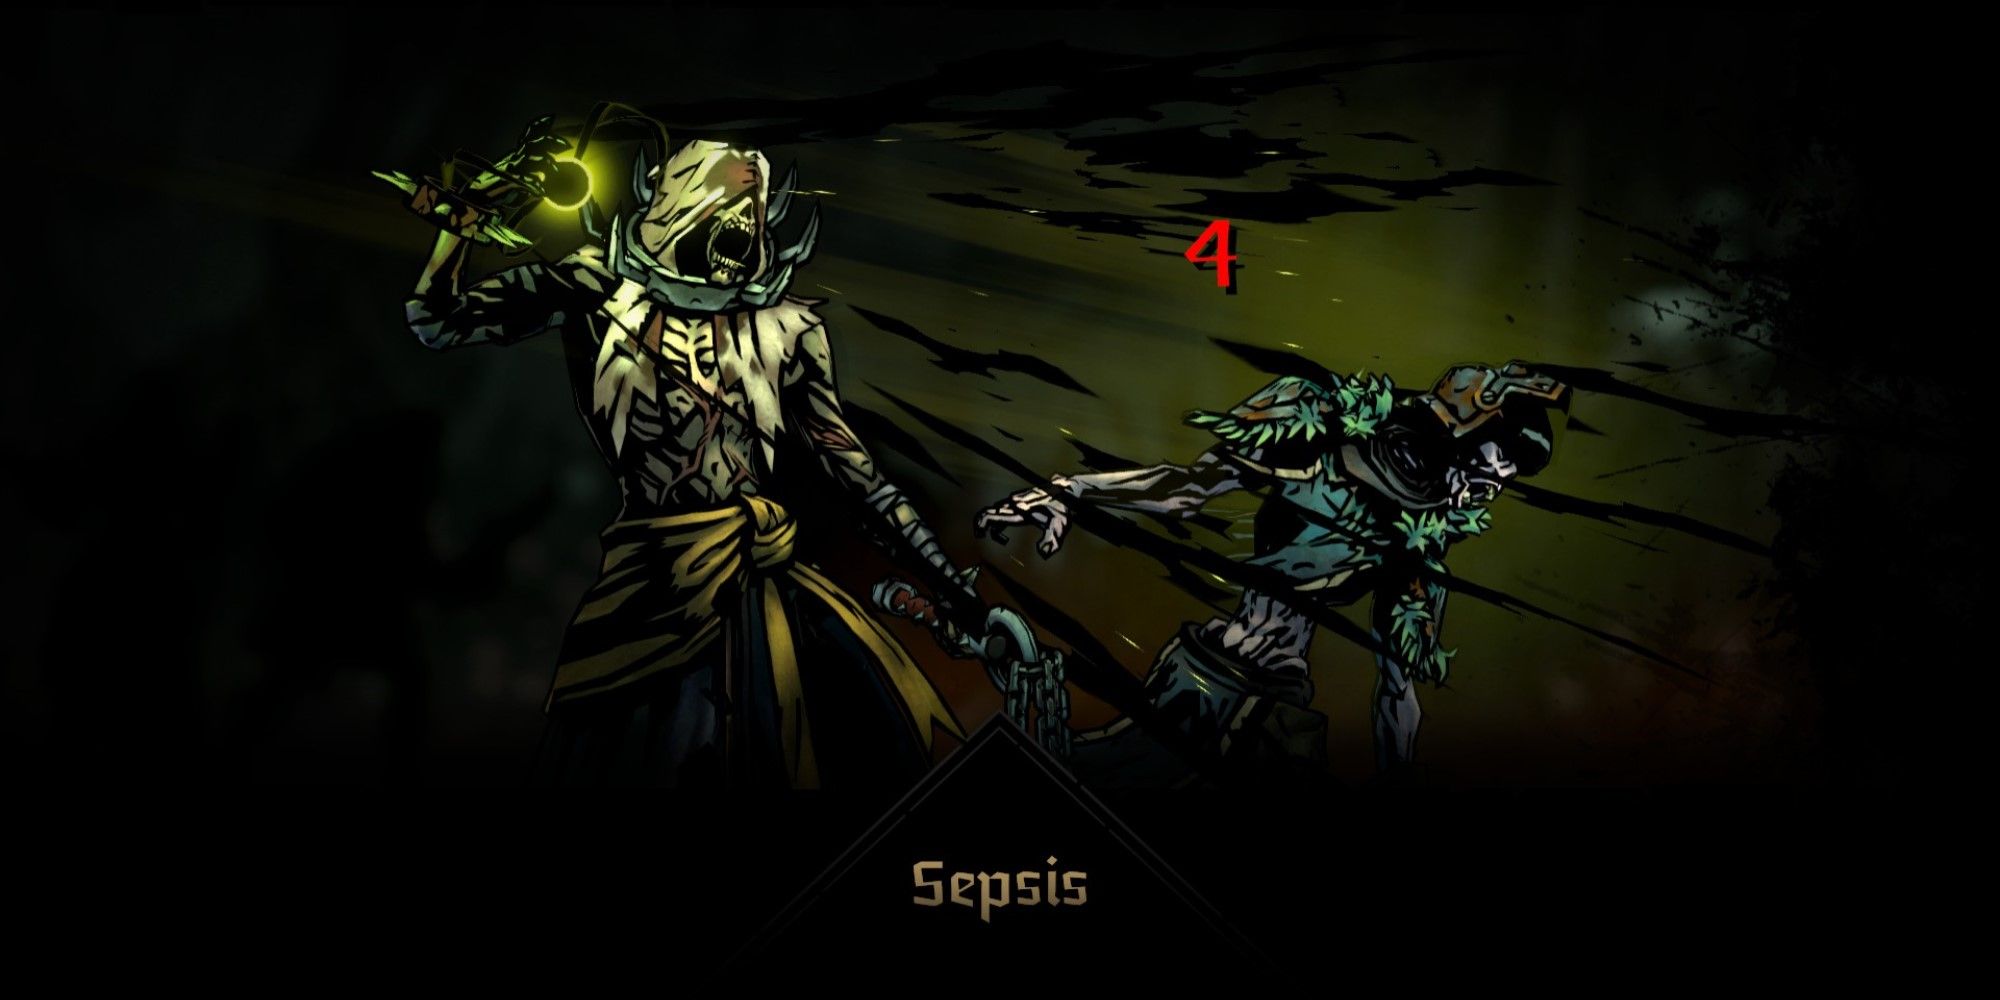 A screenshot of the Sepsis Skill being used in Darkest Dungeon 2